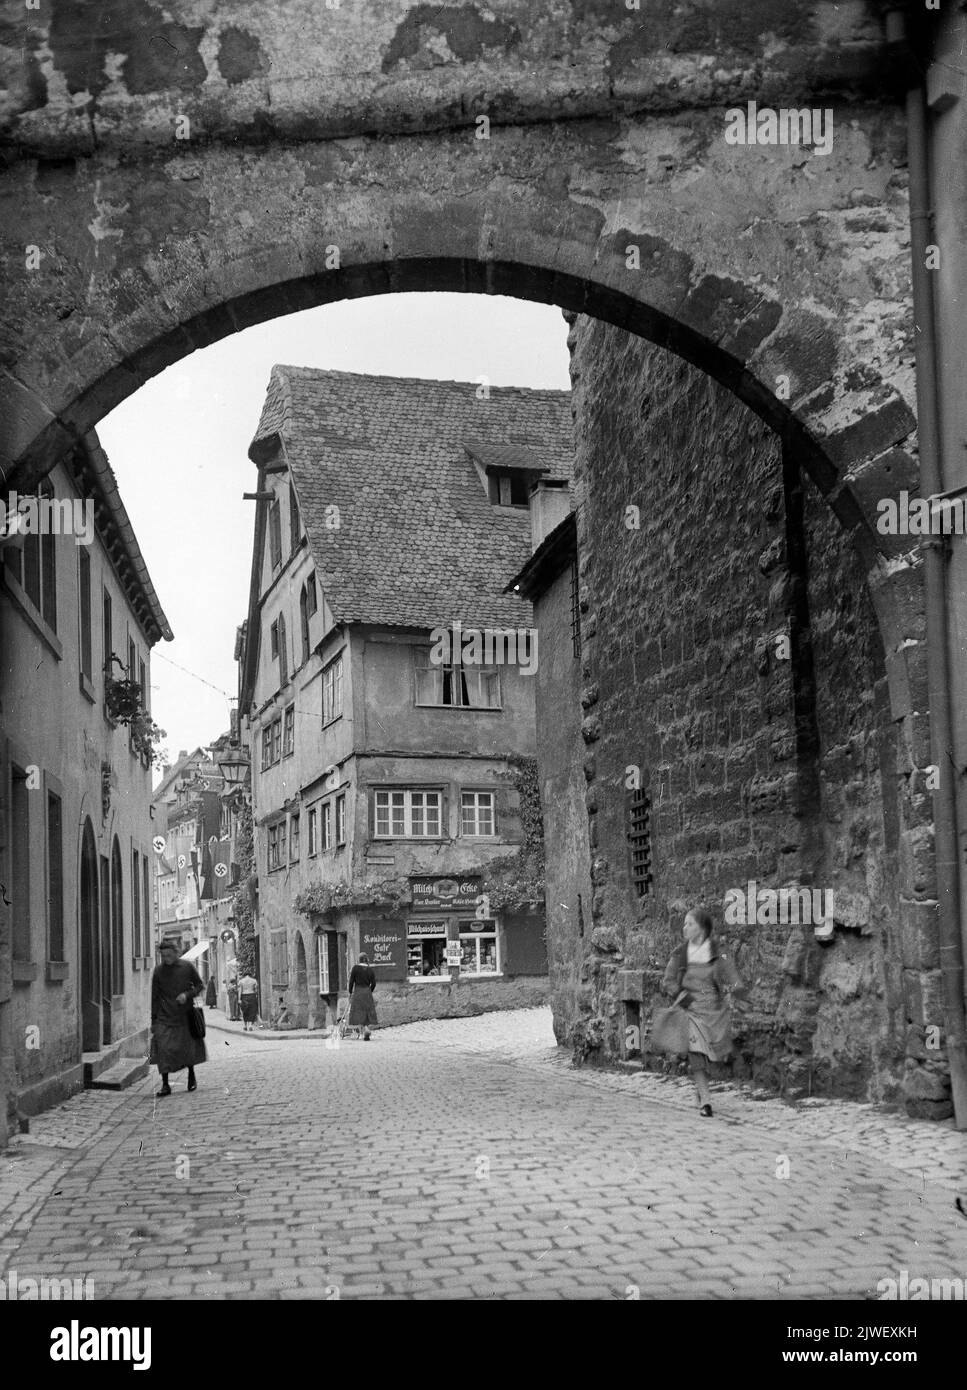 Medieval town of Rothenburg ob der Tauber, Germany 1933 with Nazi swasika flags on buildings Deutschland Stock Photo